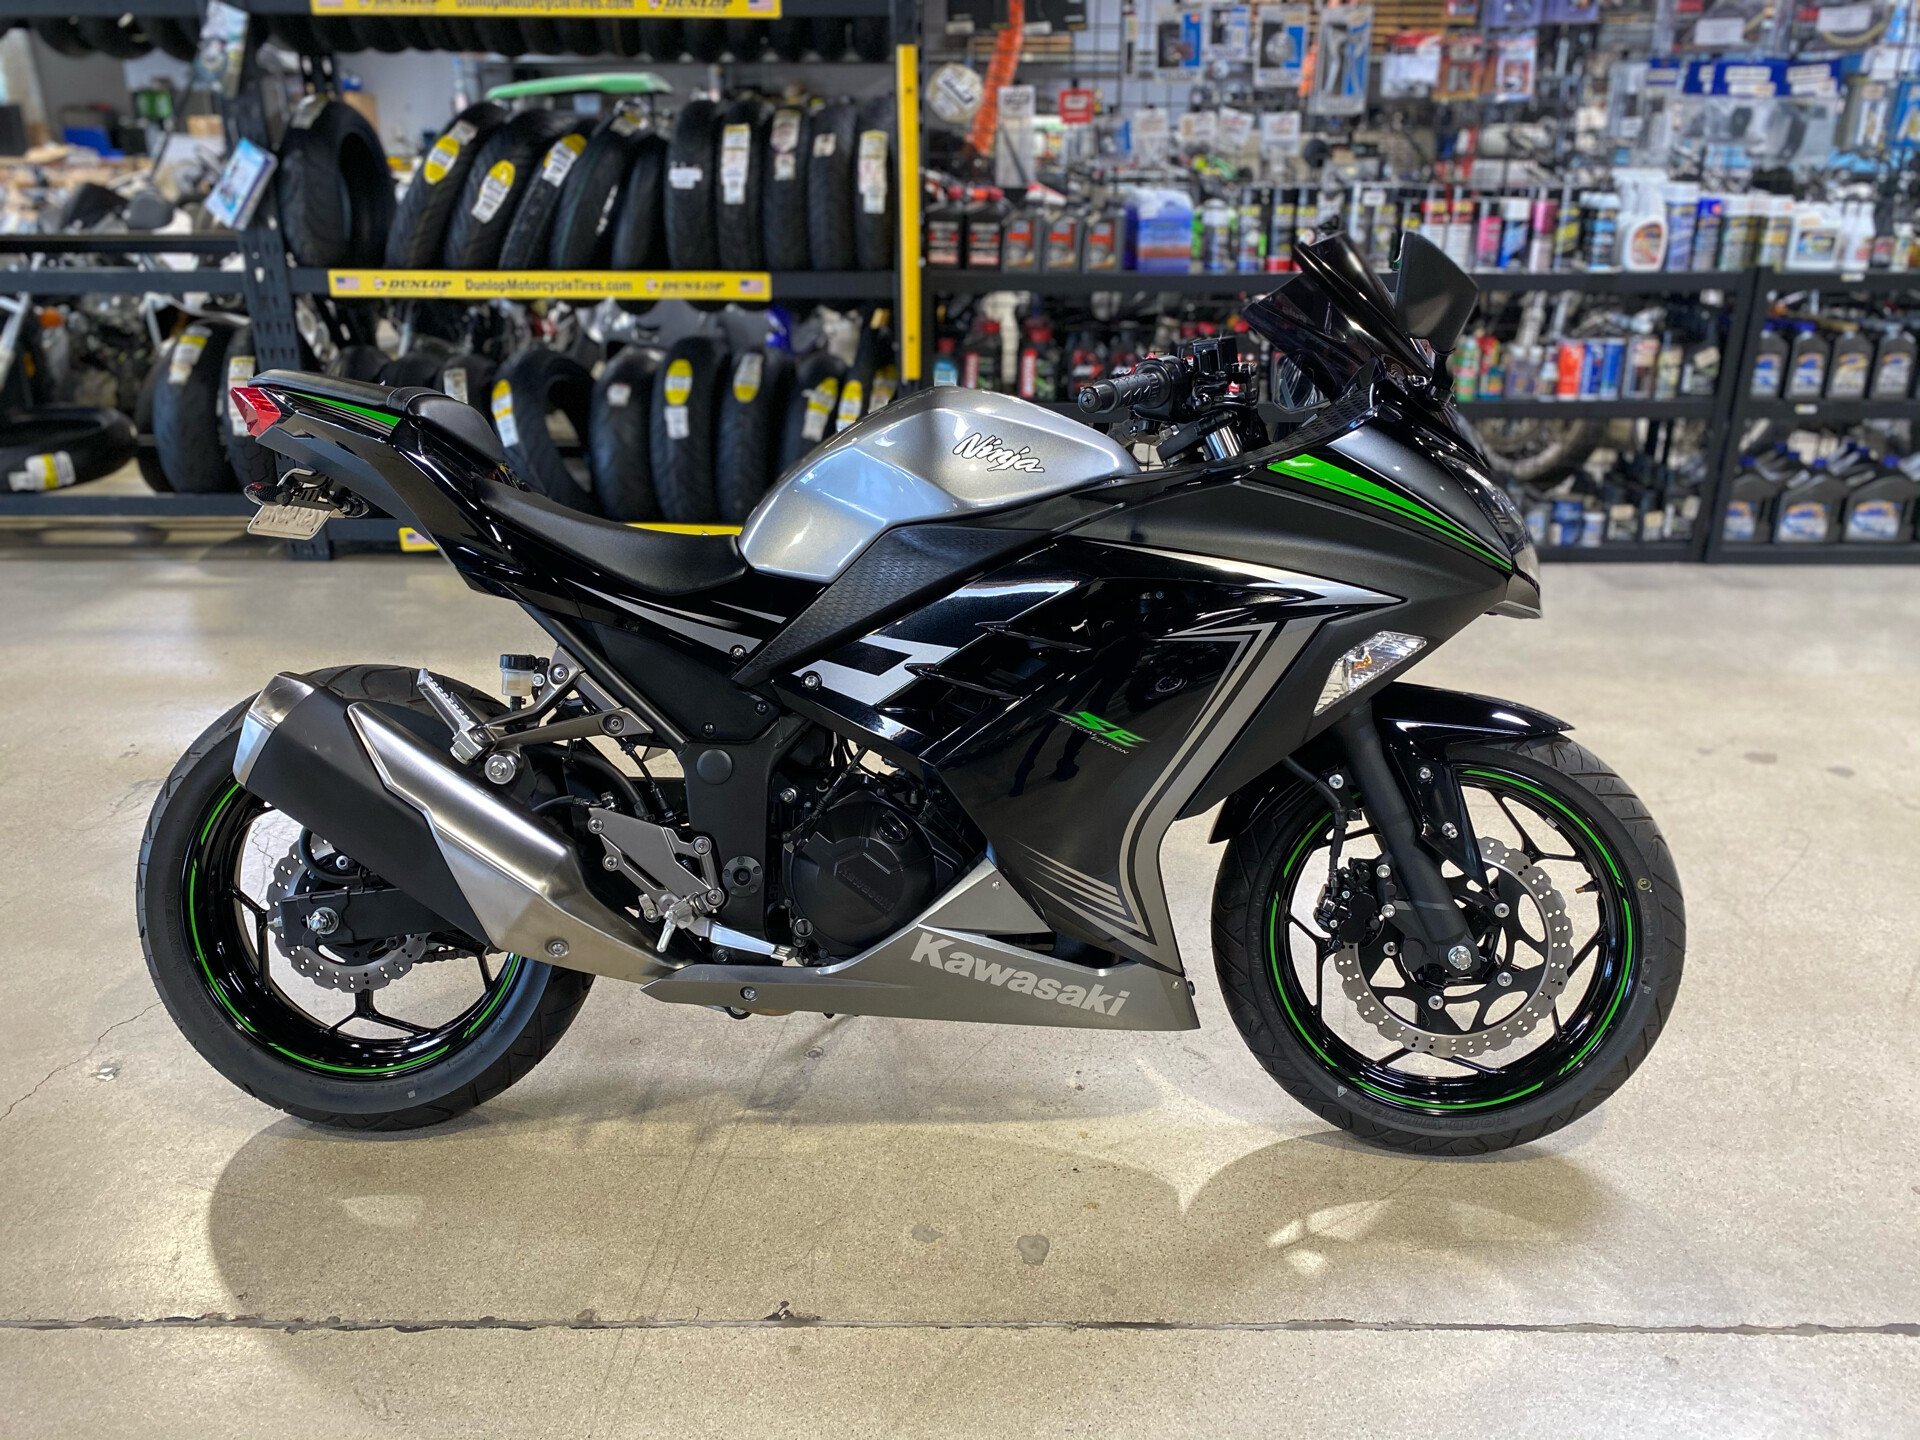 2015 Ninja 300 Motorcycles for Sale - on Autotrader